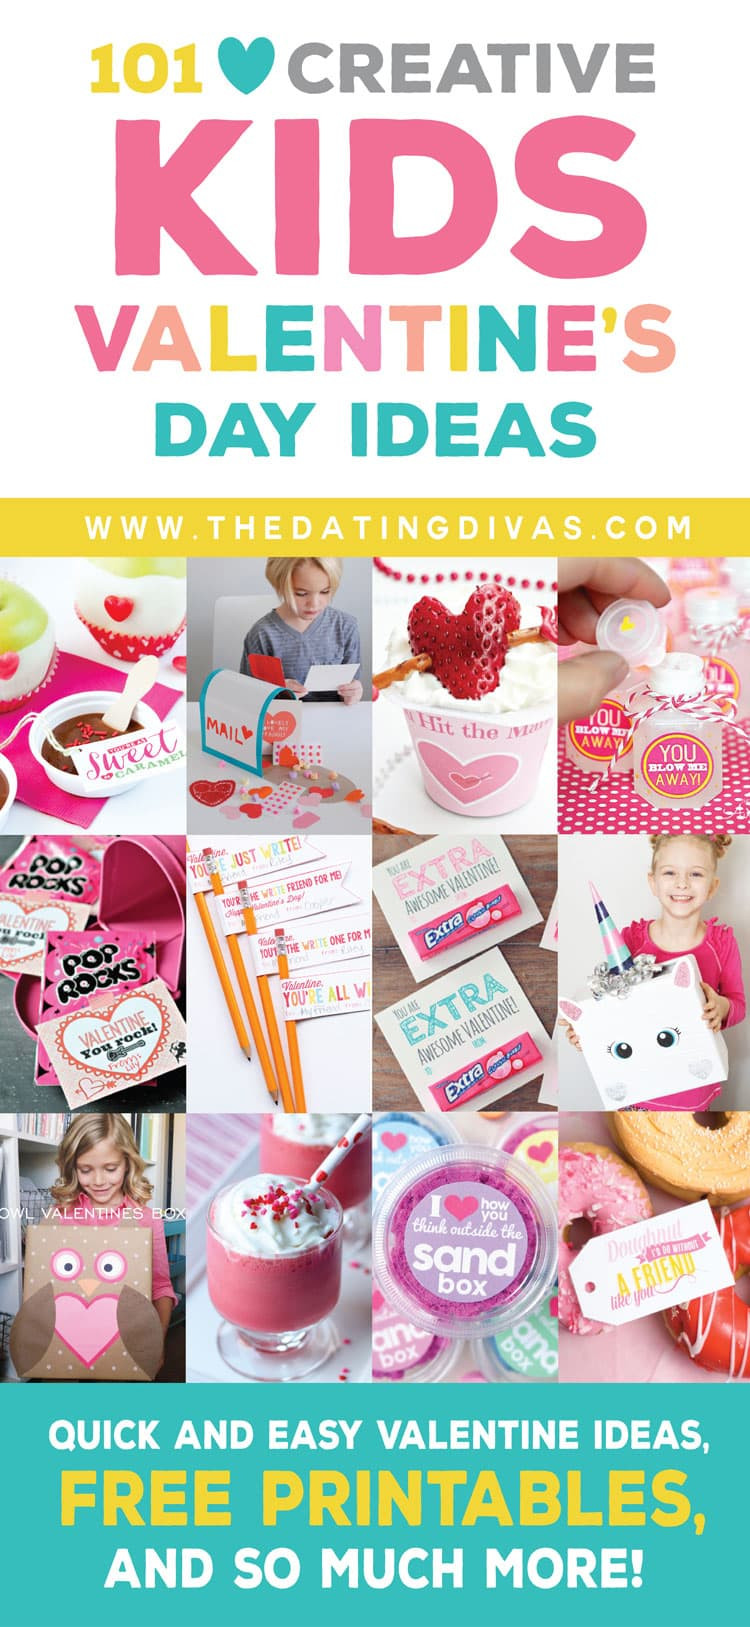 Gift Ideas For Kids For Valentines Day
 Kids Valentine s Day Ideas From The Dating Divas